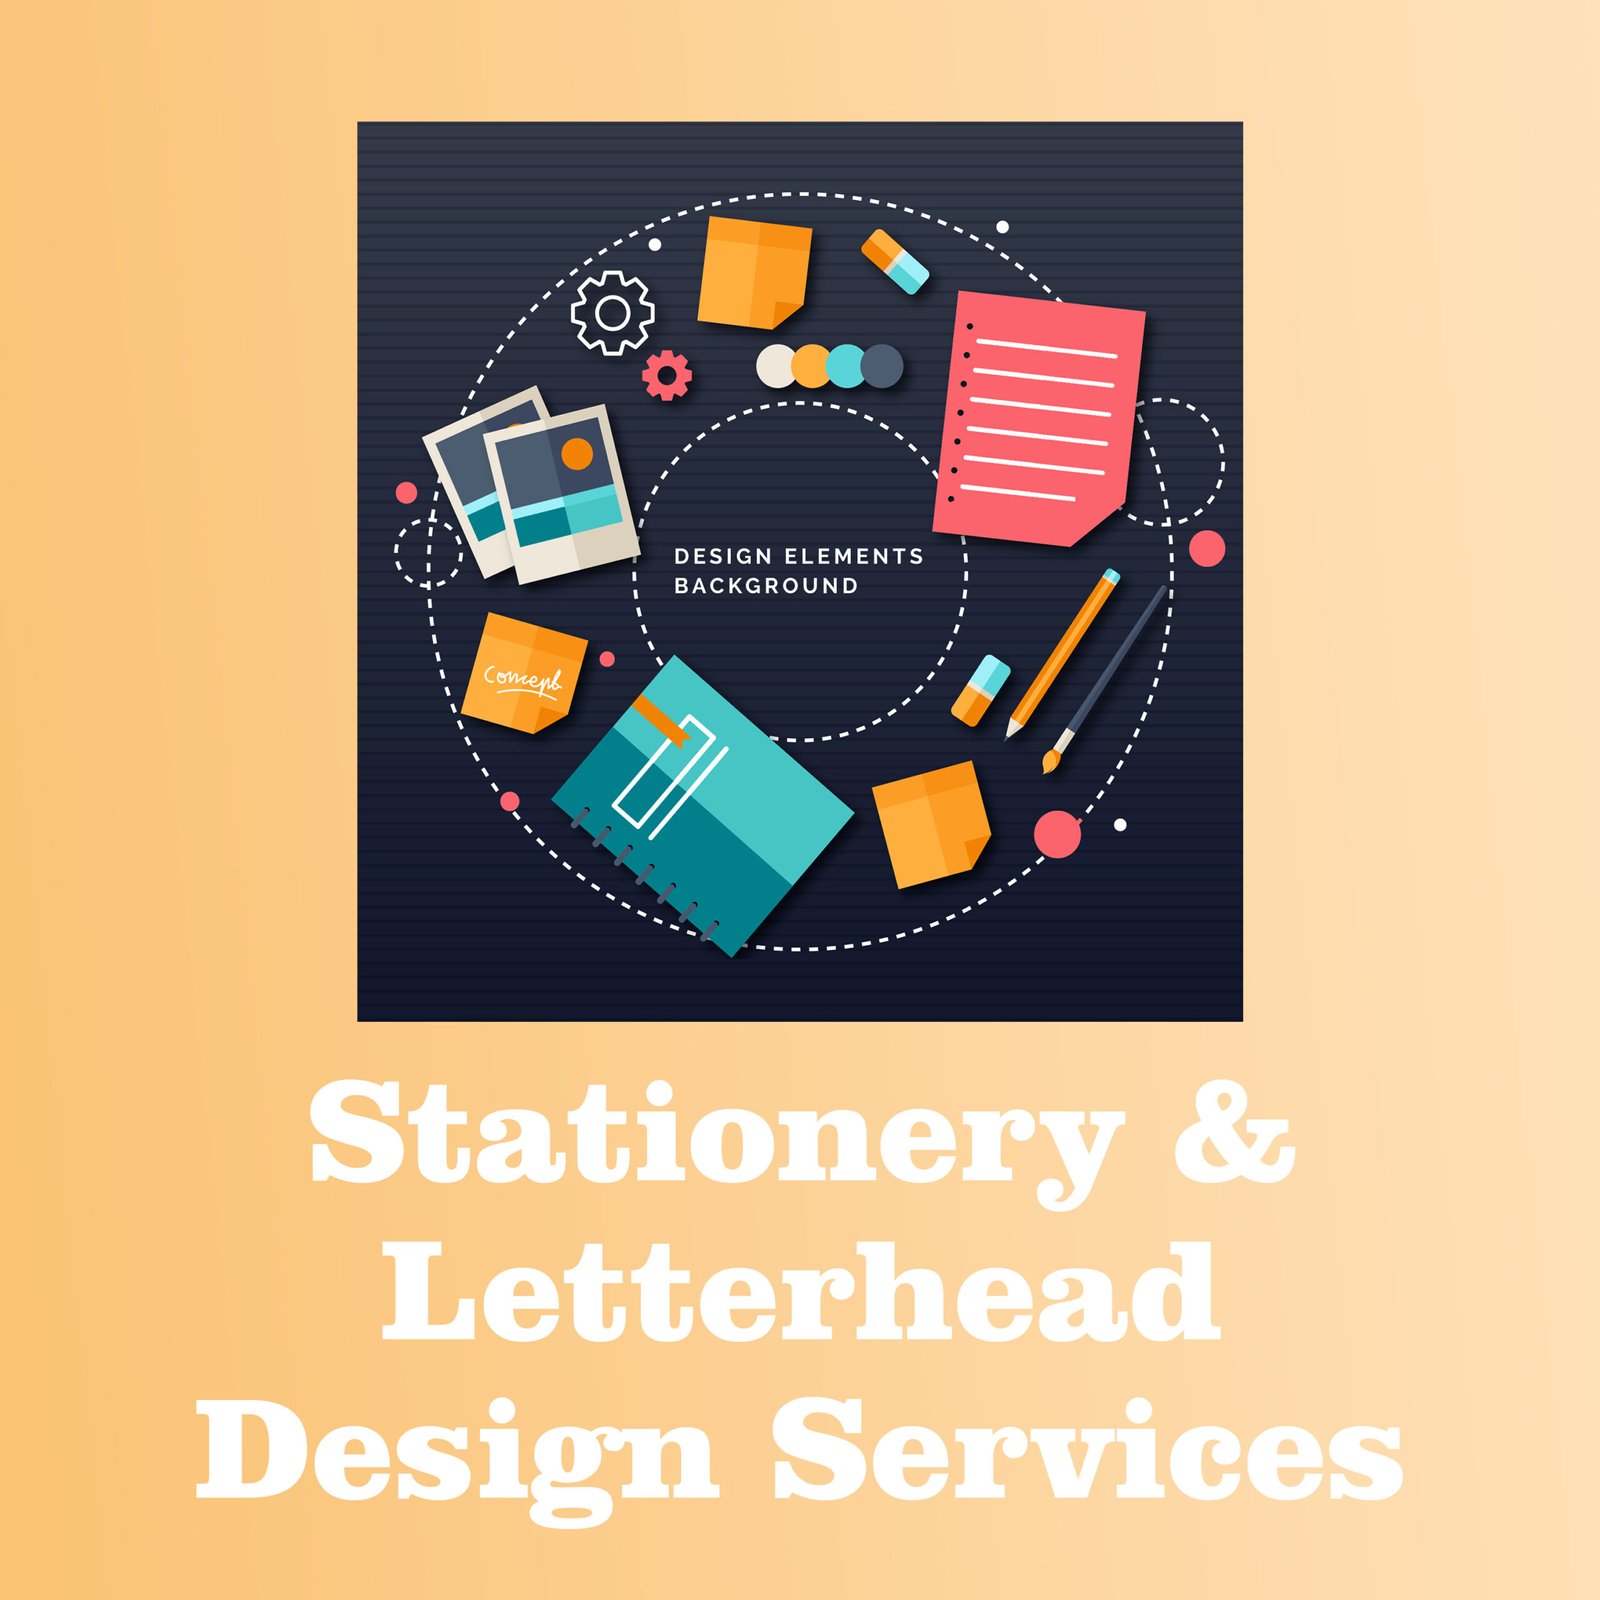 stationery & Letterhead design services